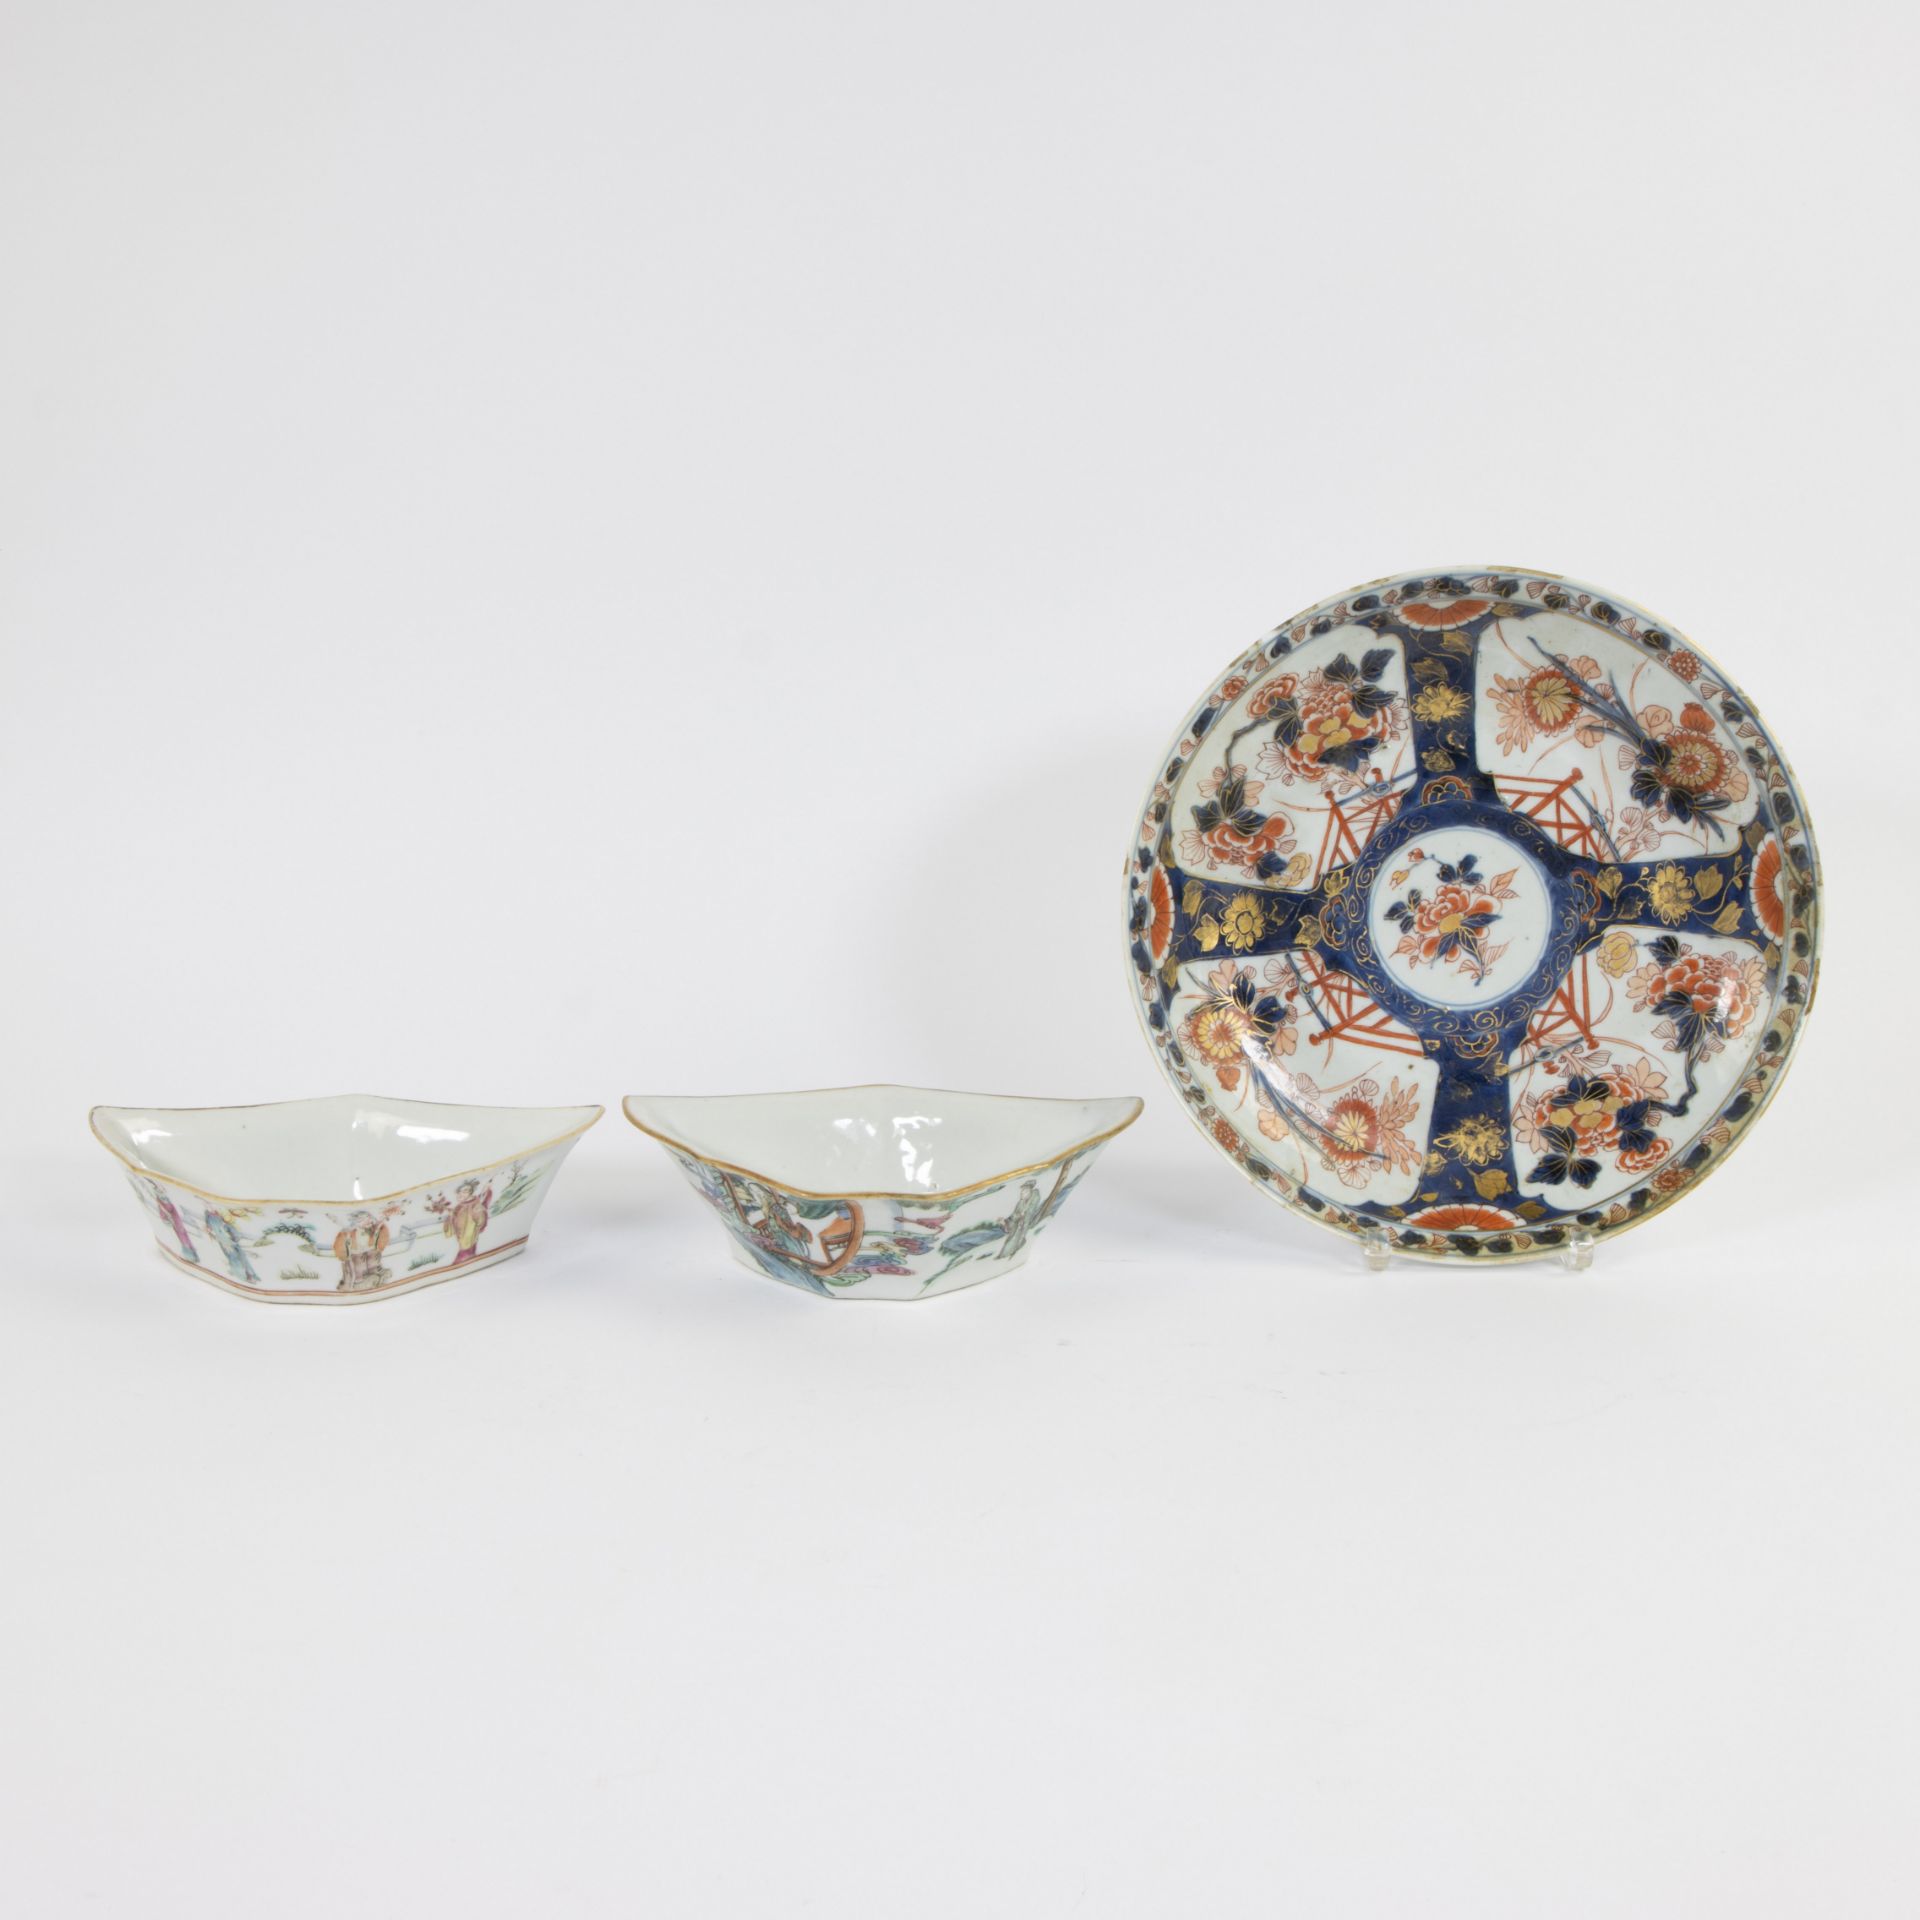 Collection Chinese 2 bowls 1 marked Tongxhi and Imari plate 18th century